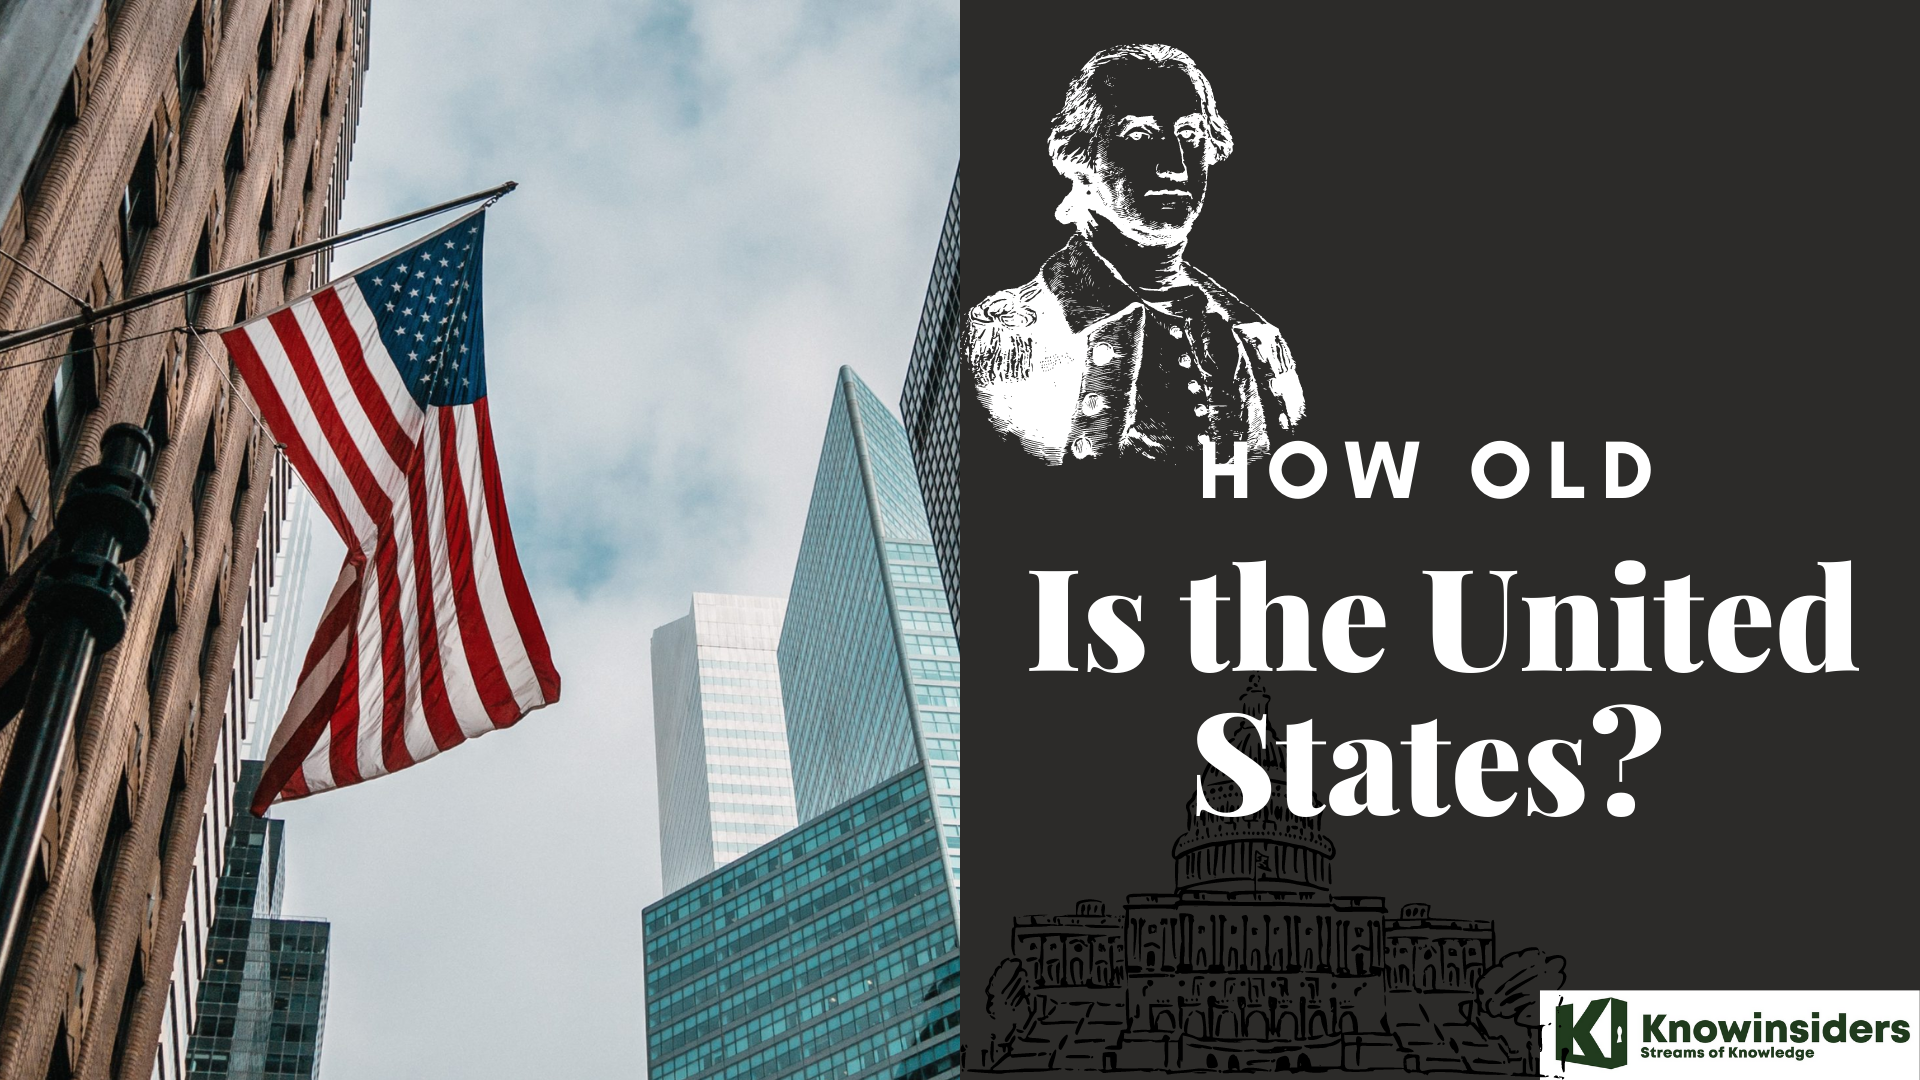 How old is the United States?